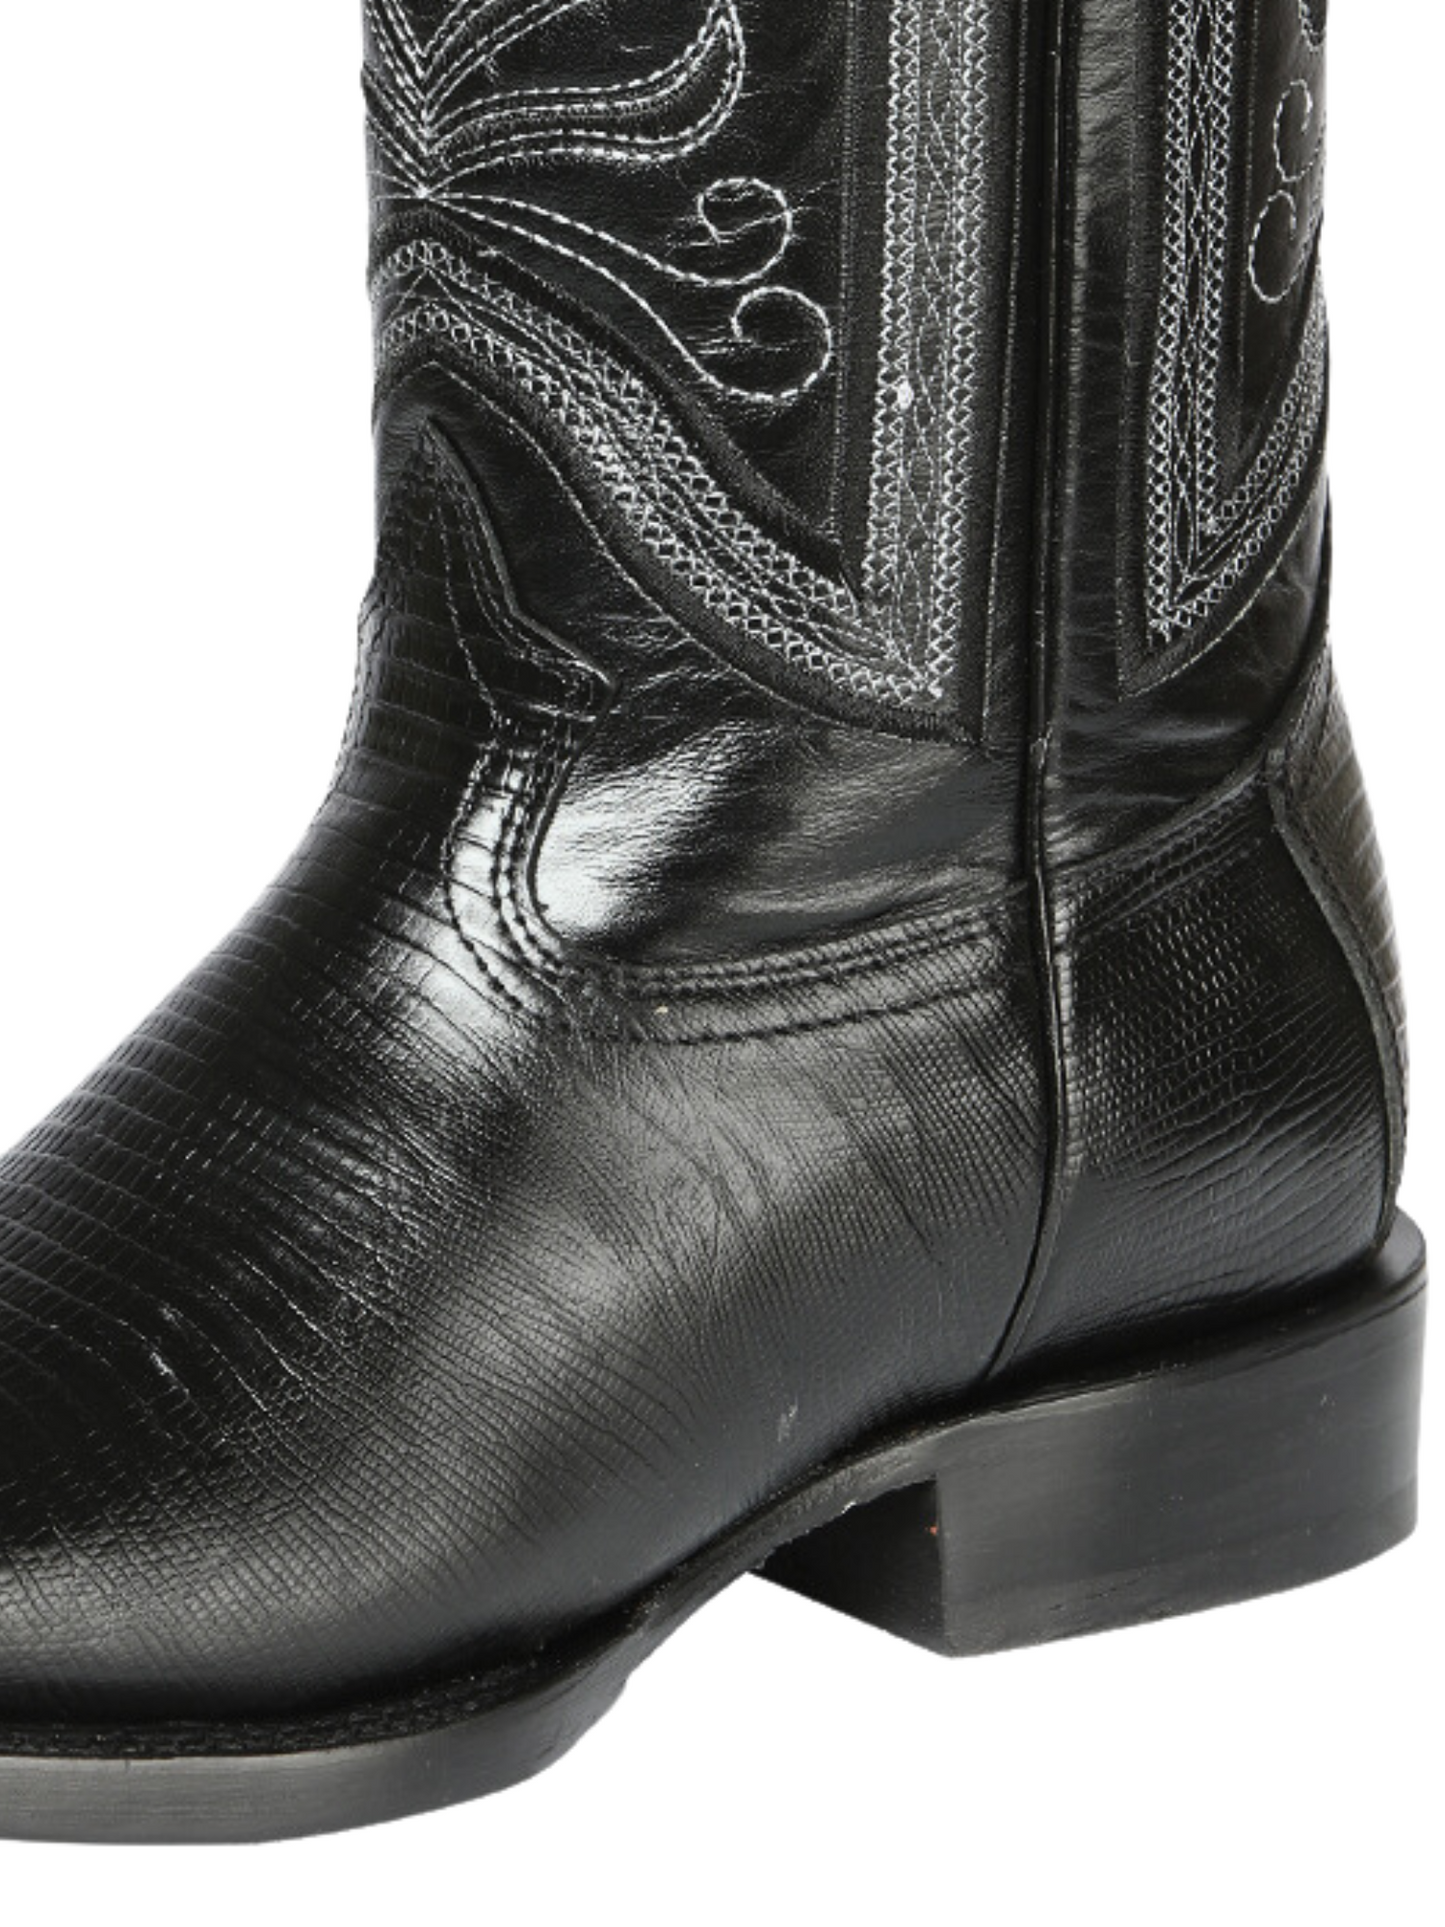 Rodeo Cowboy Boots Imitation of Lizard Engraved in Cowhide Leather for Men 'El General' - ID: 44666 Cowboy Boots El General